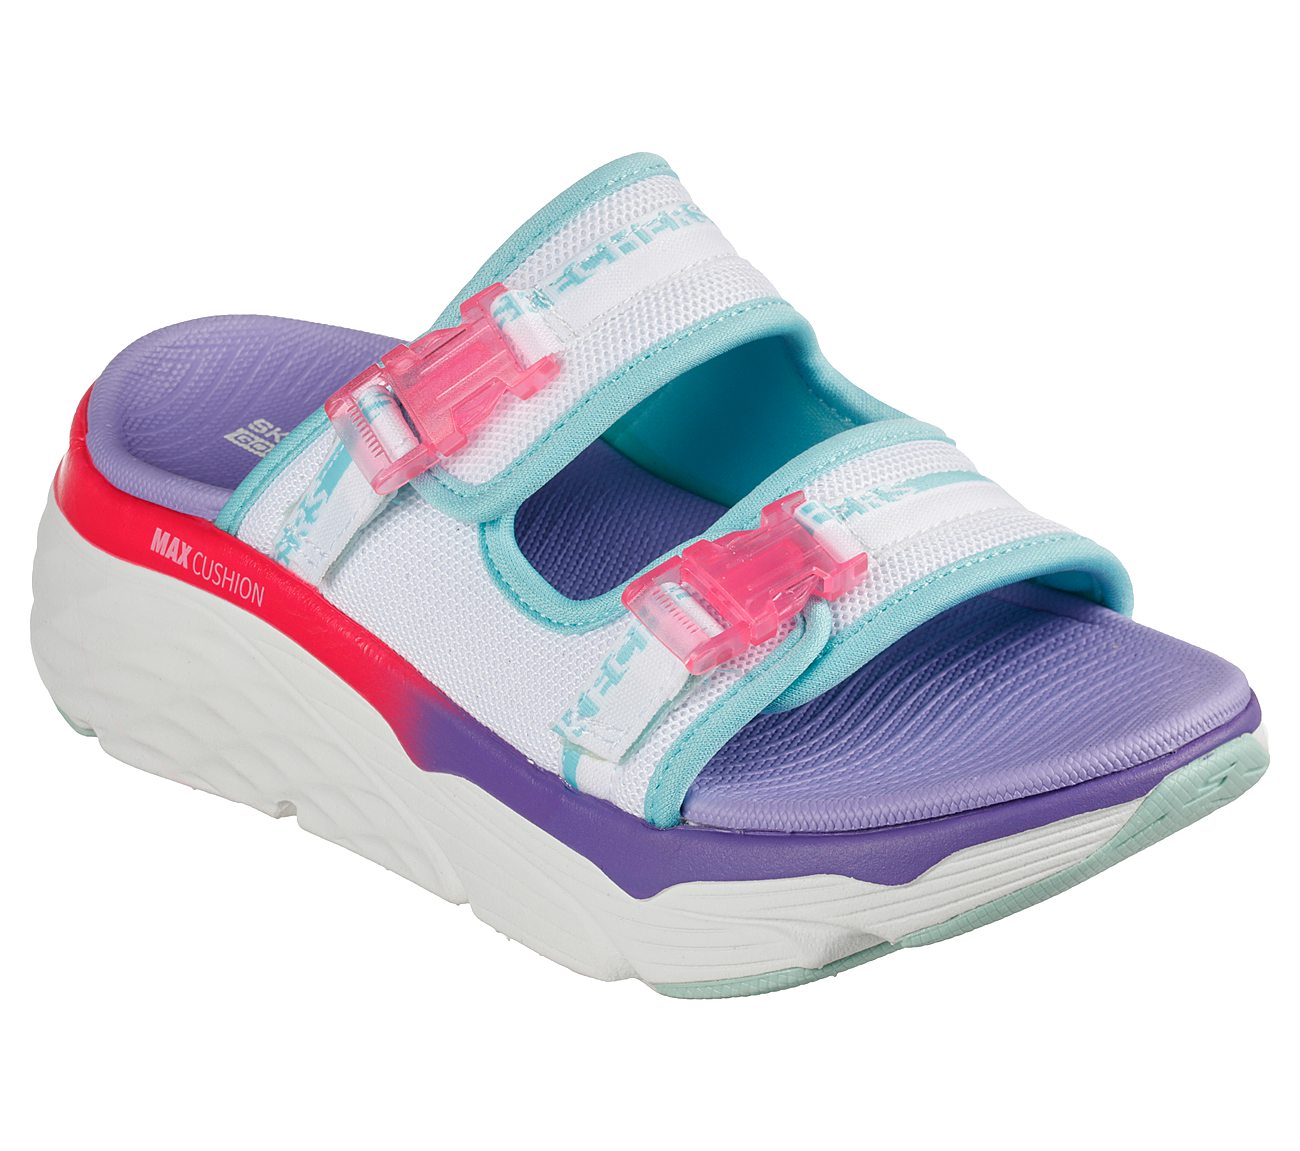 MAX CUSHIONING SANDAL - OBVI, WHITE/MULTI Footwear Right View